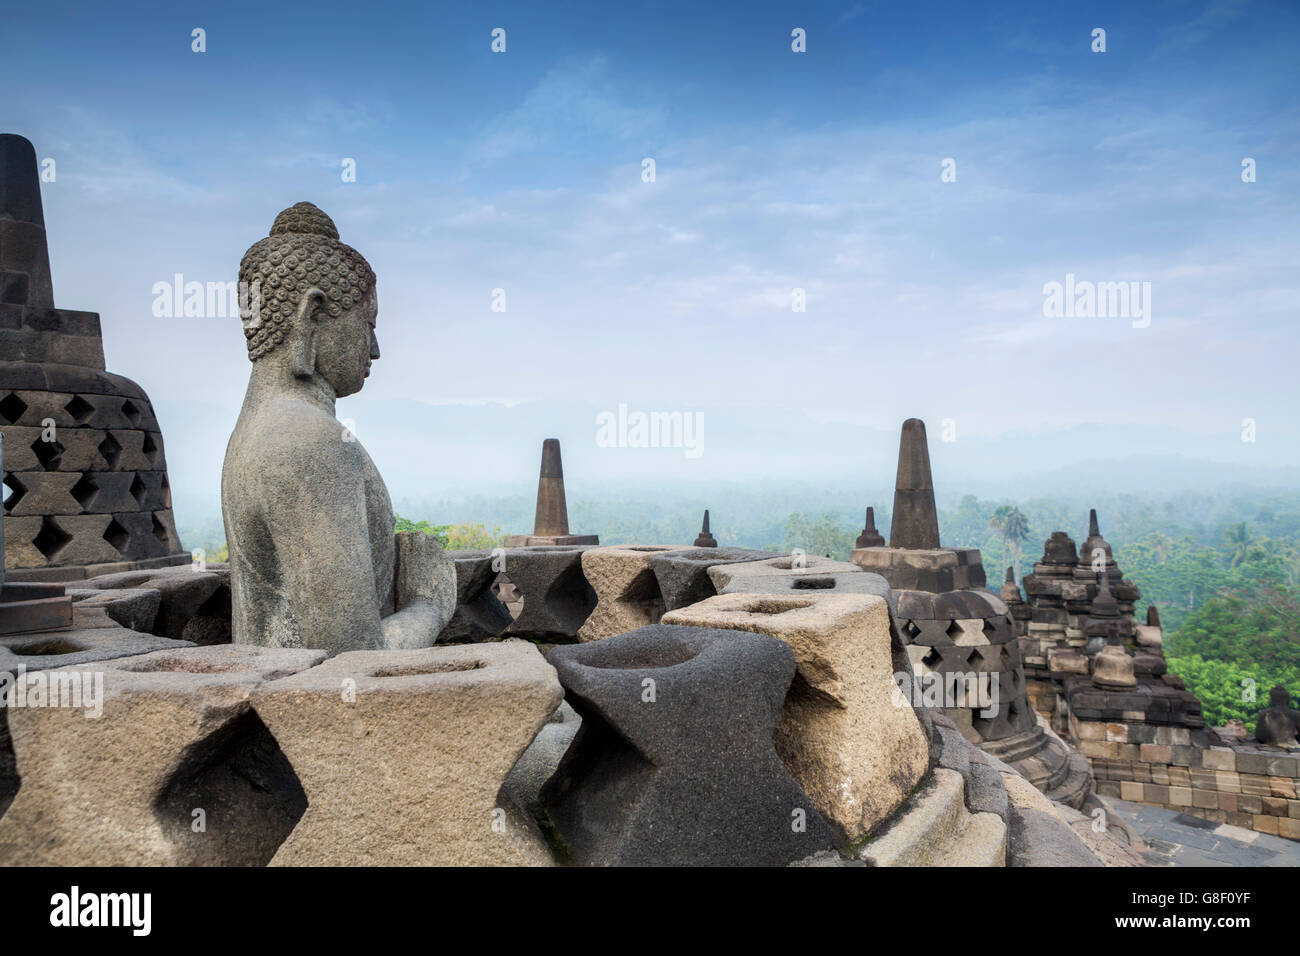 Borobudur World Heritage Site, a 9th-century Mahayana Buddhist Temple in Magelang, Central Java, Indonesia Stock Photo